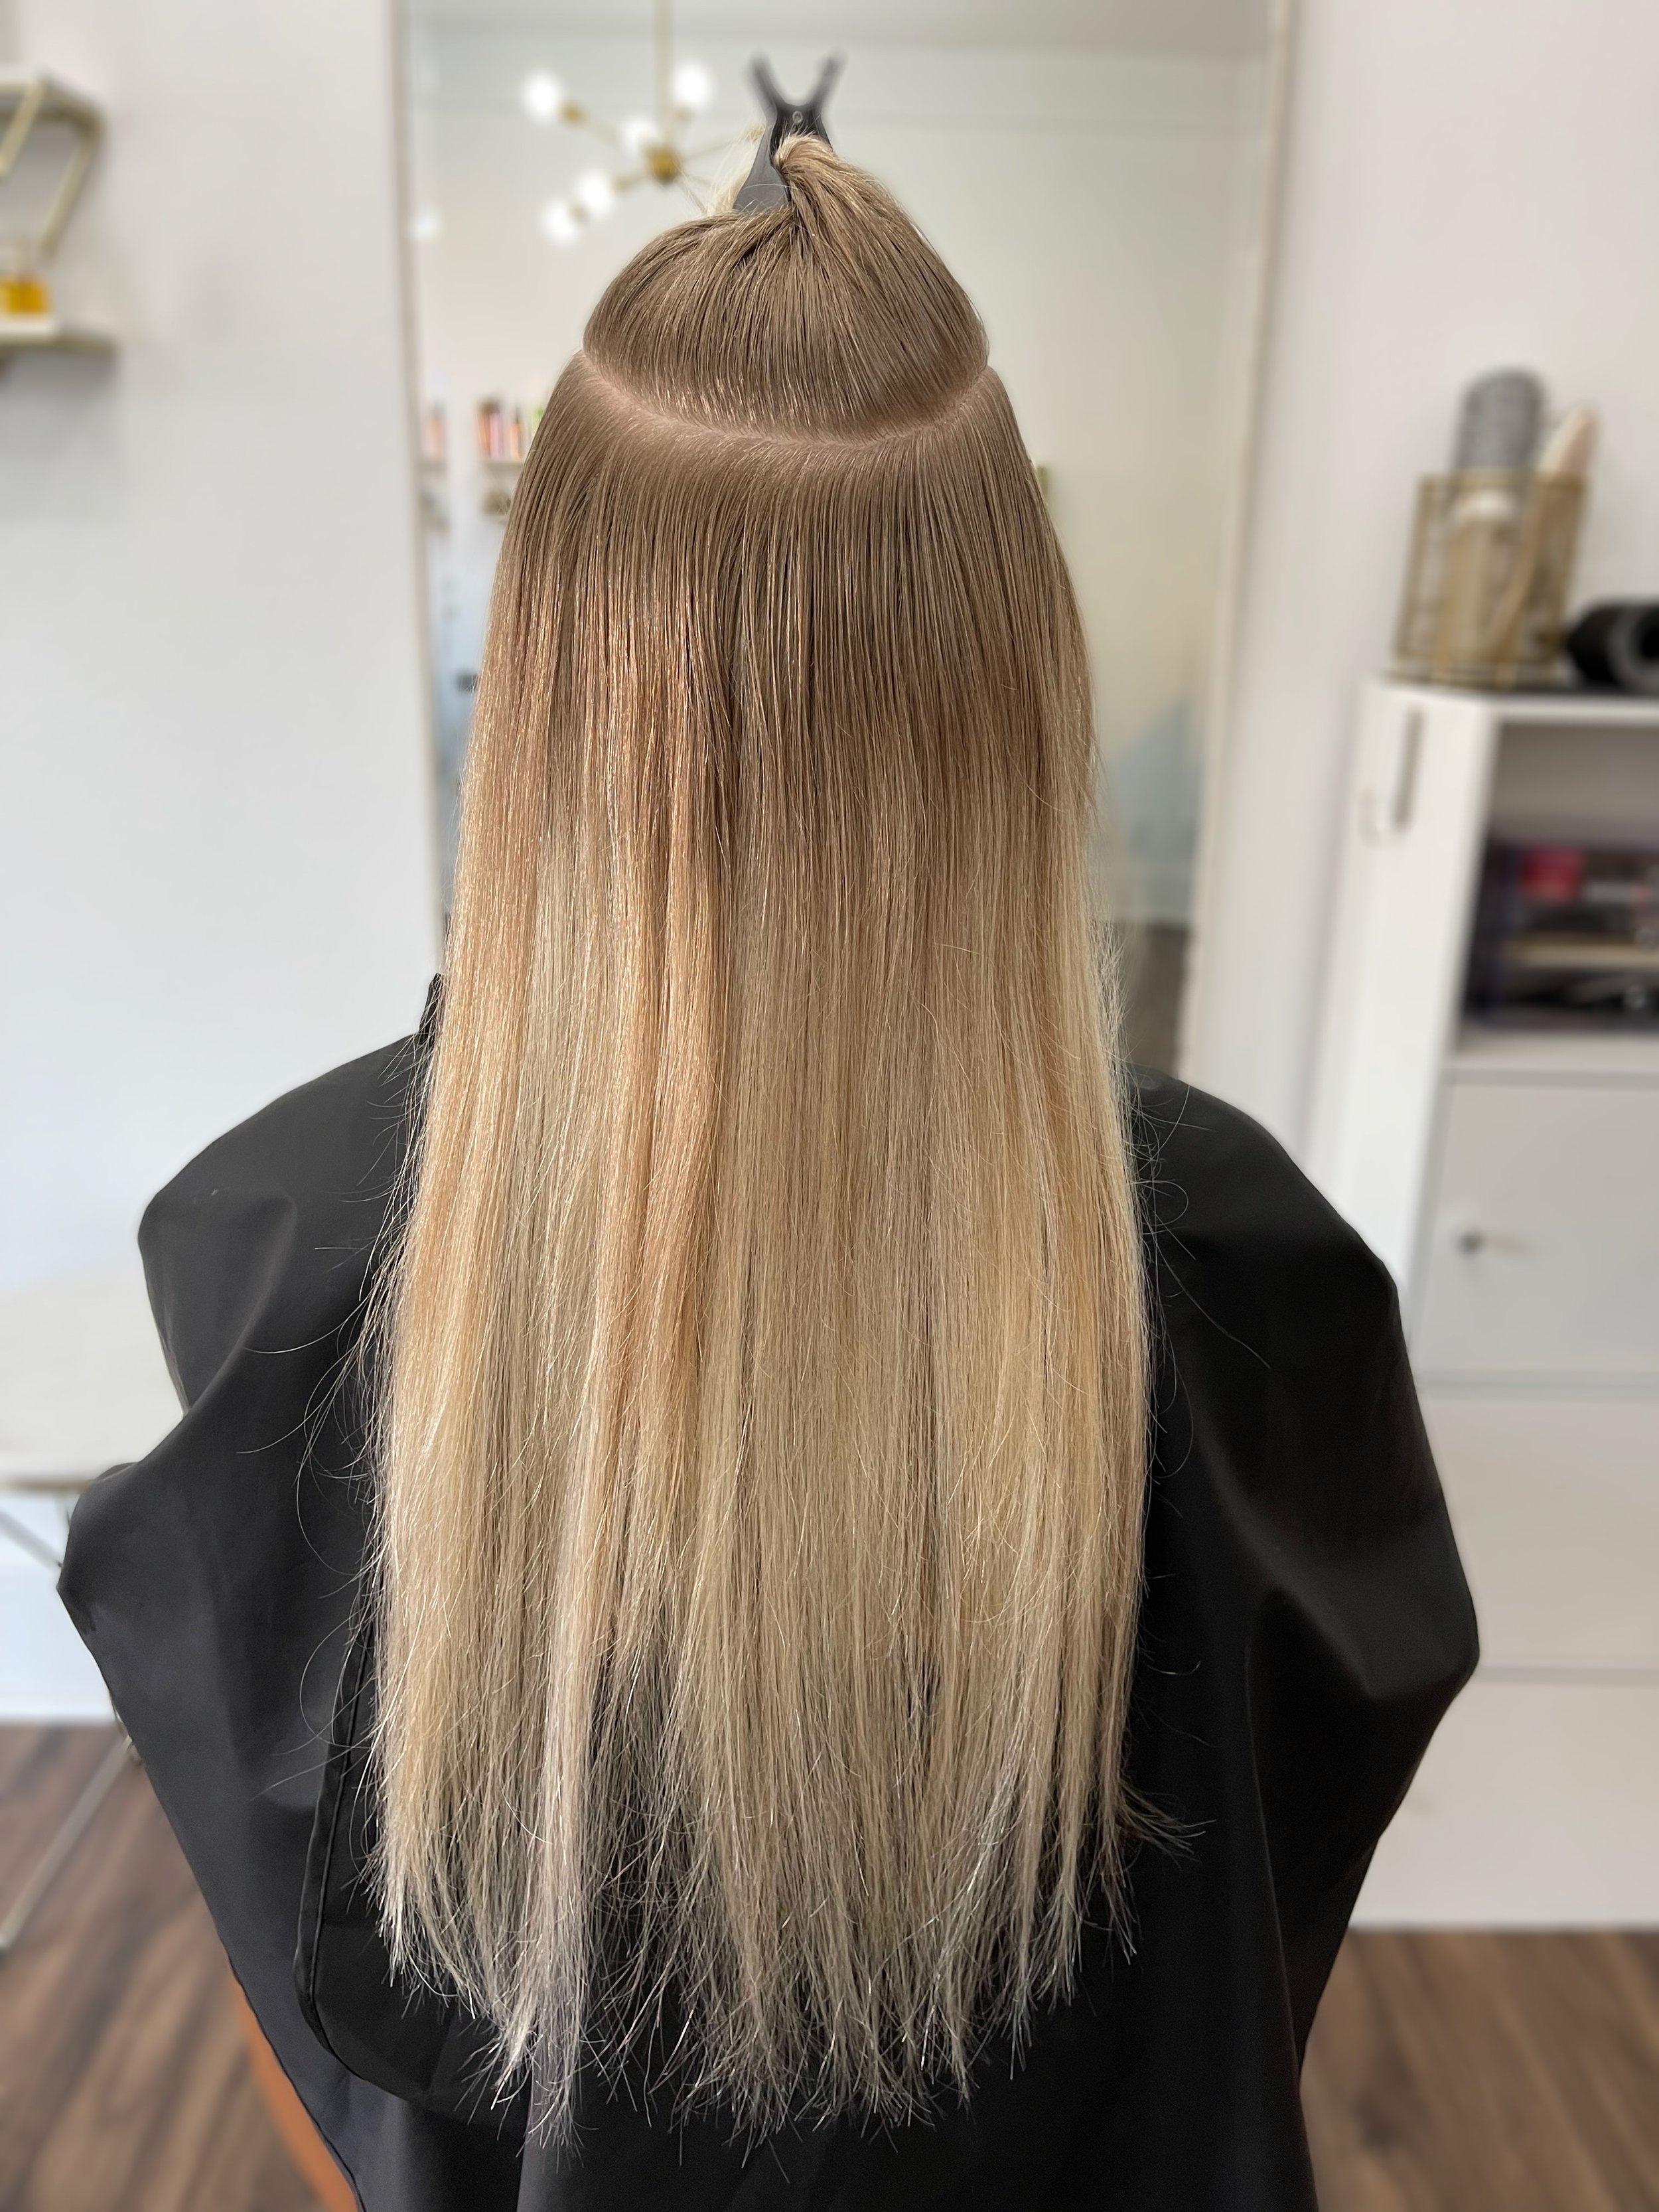 What Are Hand Tied Hair Extensions? Everything You Need To Know